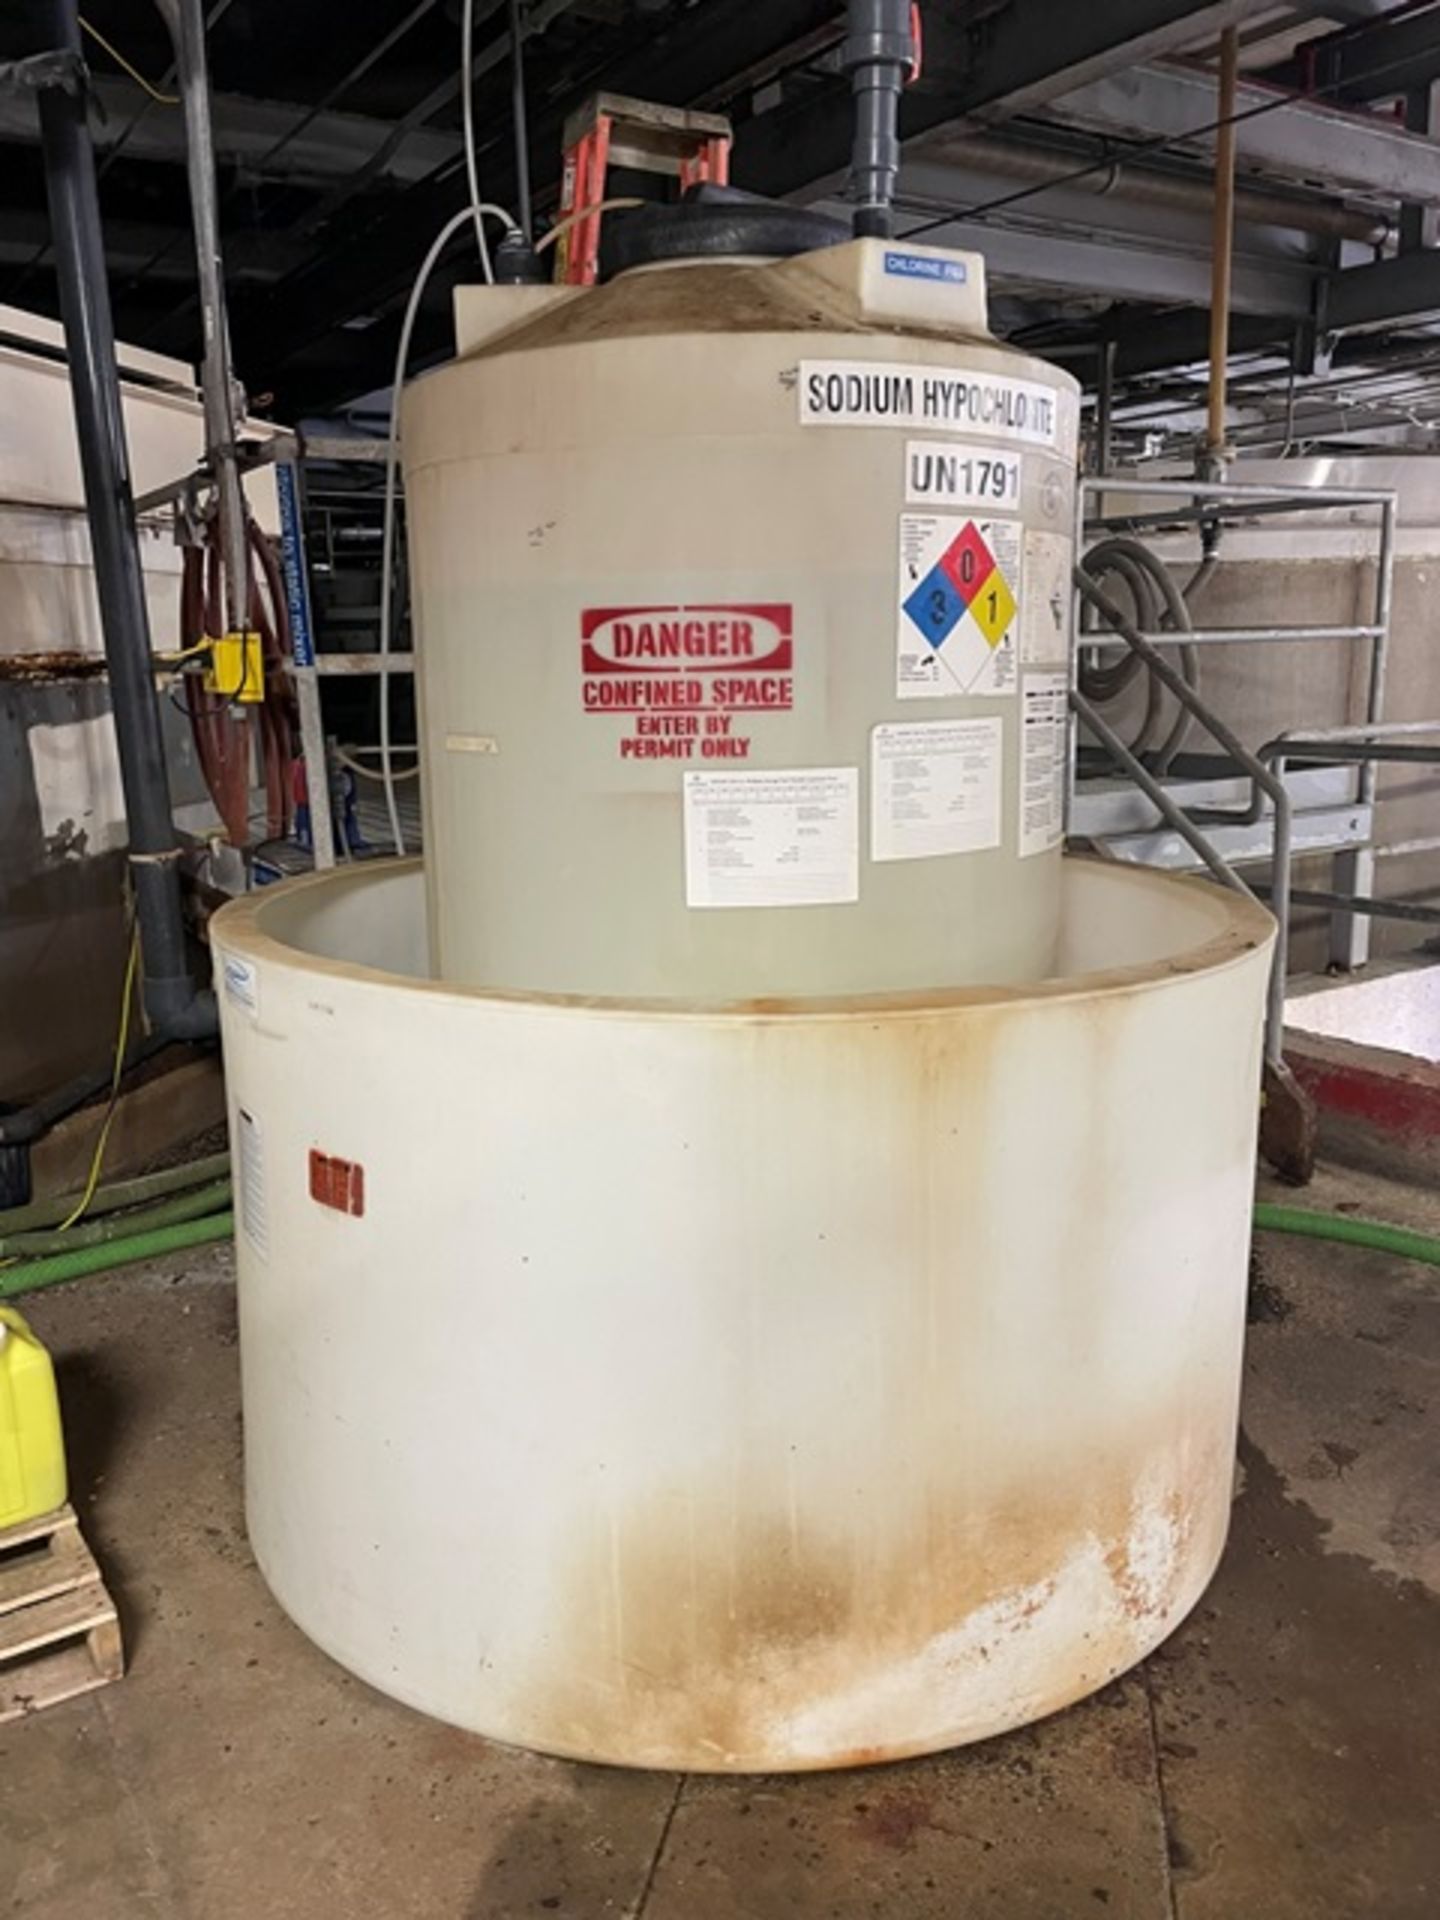 Poly Process Minibulk Storage Tank, Includes Poly Containment, Rigging & Loading Fee: $375 - Image 2 of 6